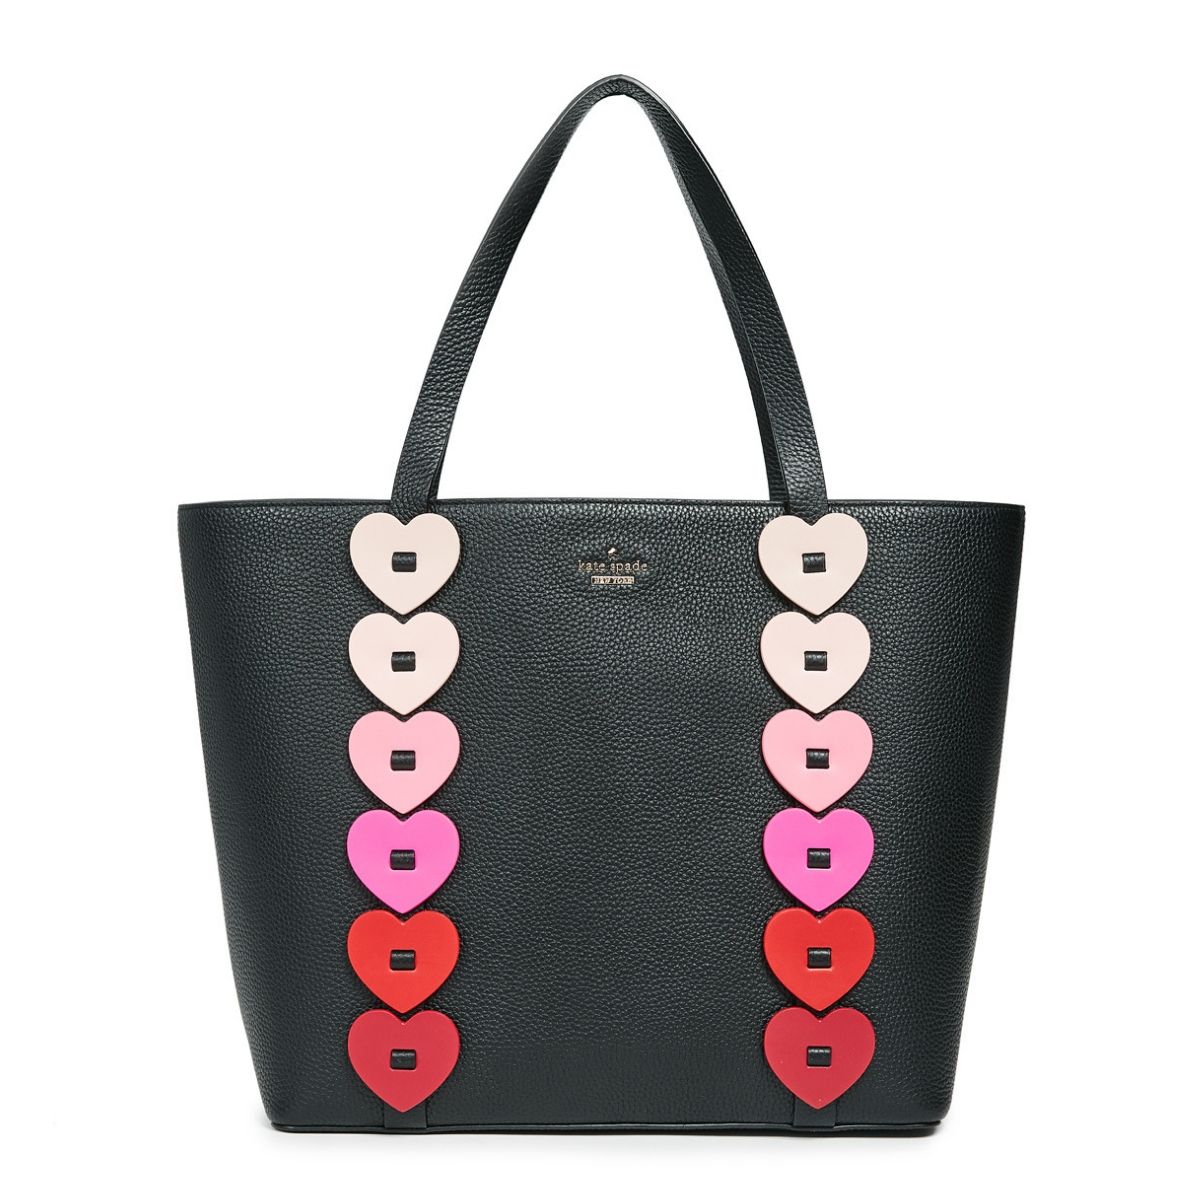 Ours Truly Ombre Heart Tote Bag - Seven Season